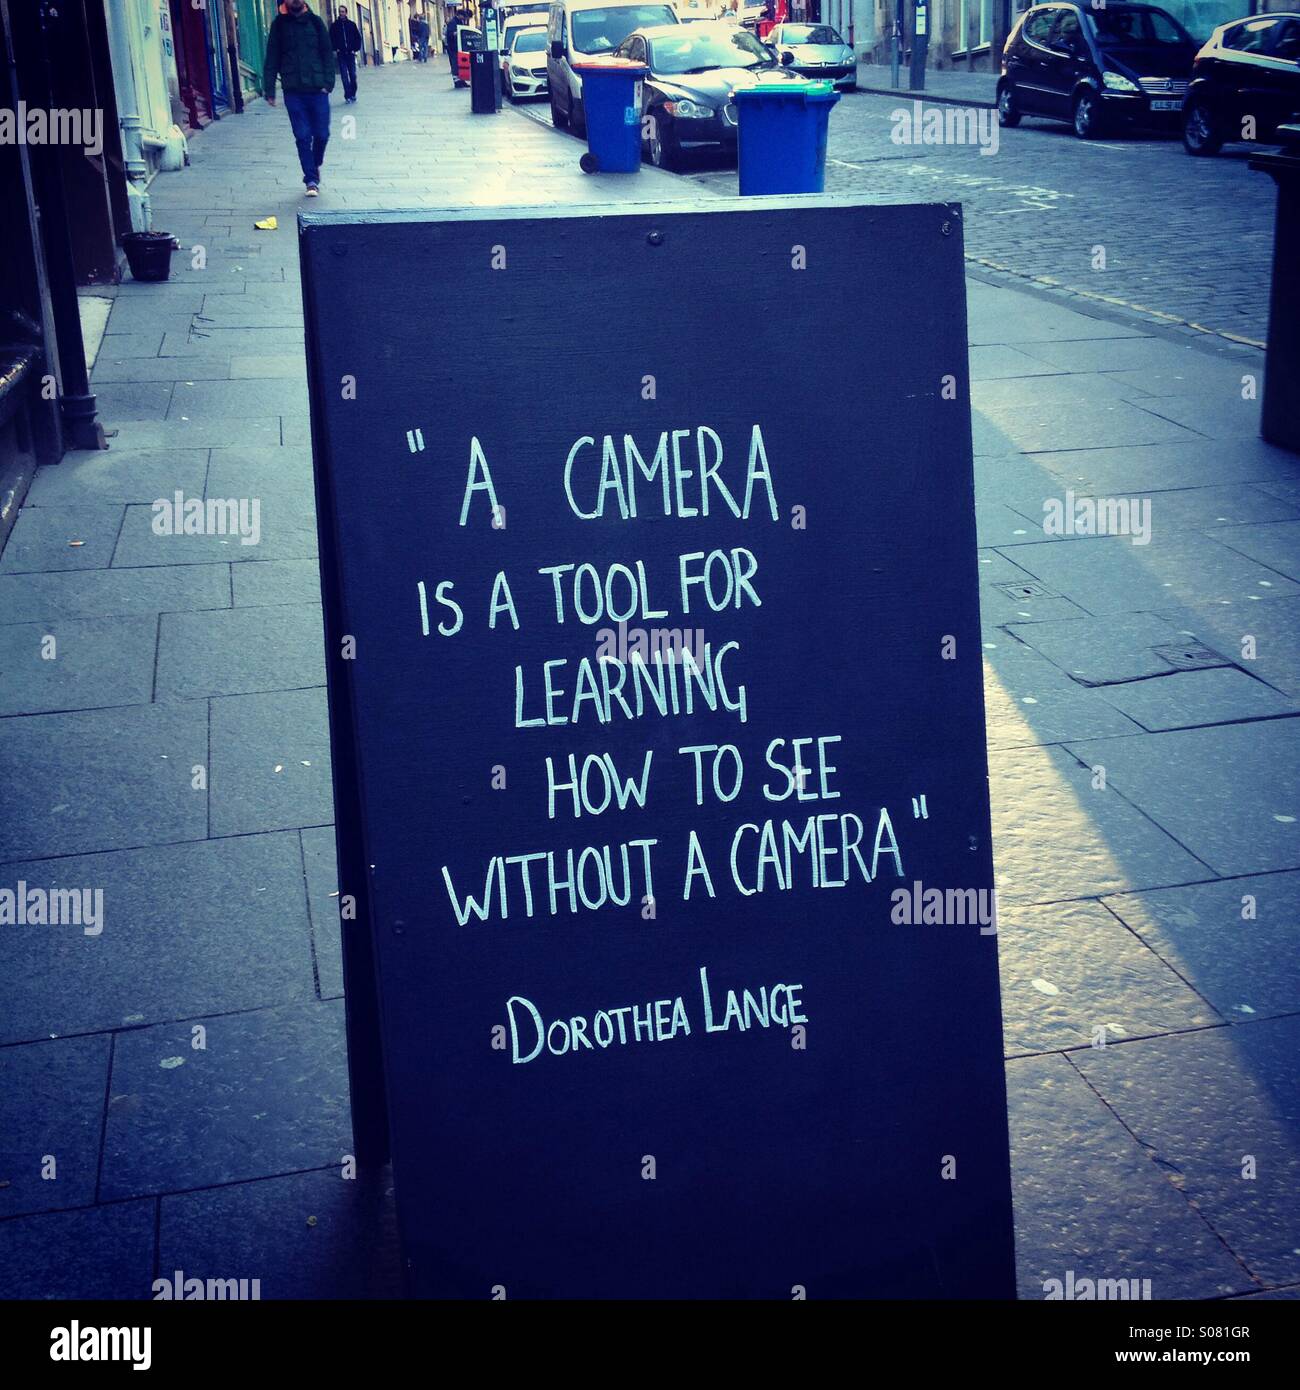 Quote on photography and seeing things by Dirothea Lange, American photographer from the 1930s. Stock Photo